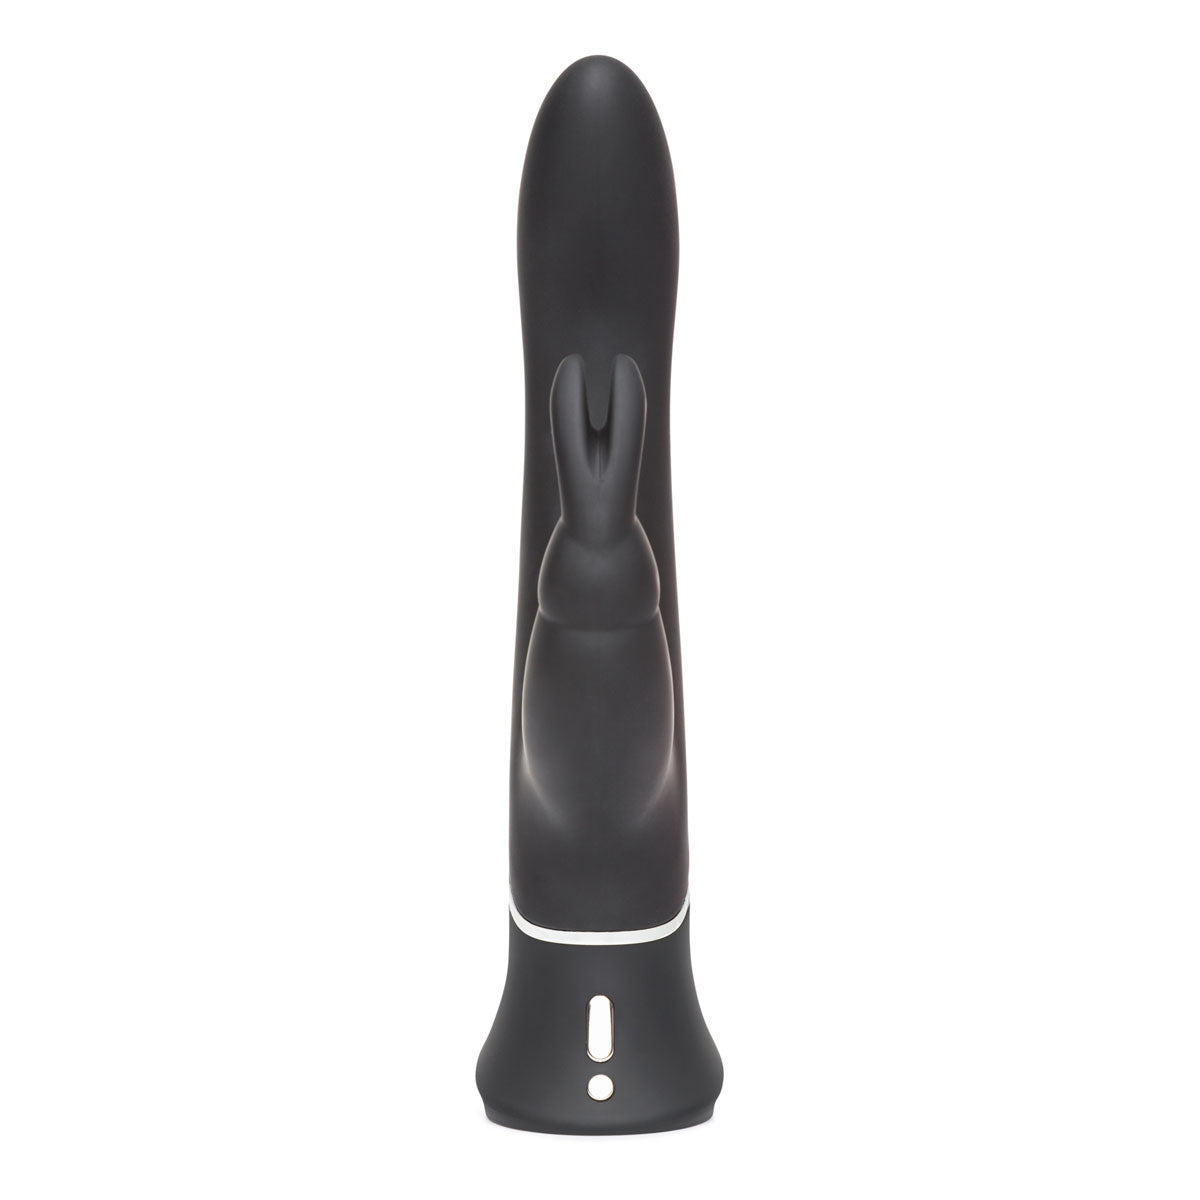 Happy Rabbit Elite Triple Curve Vibrator by Lovehoney - Black front view of the tickler and control buttons